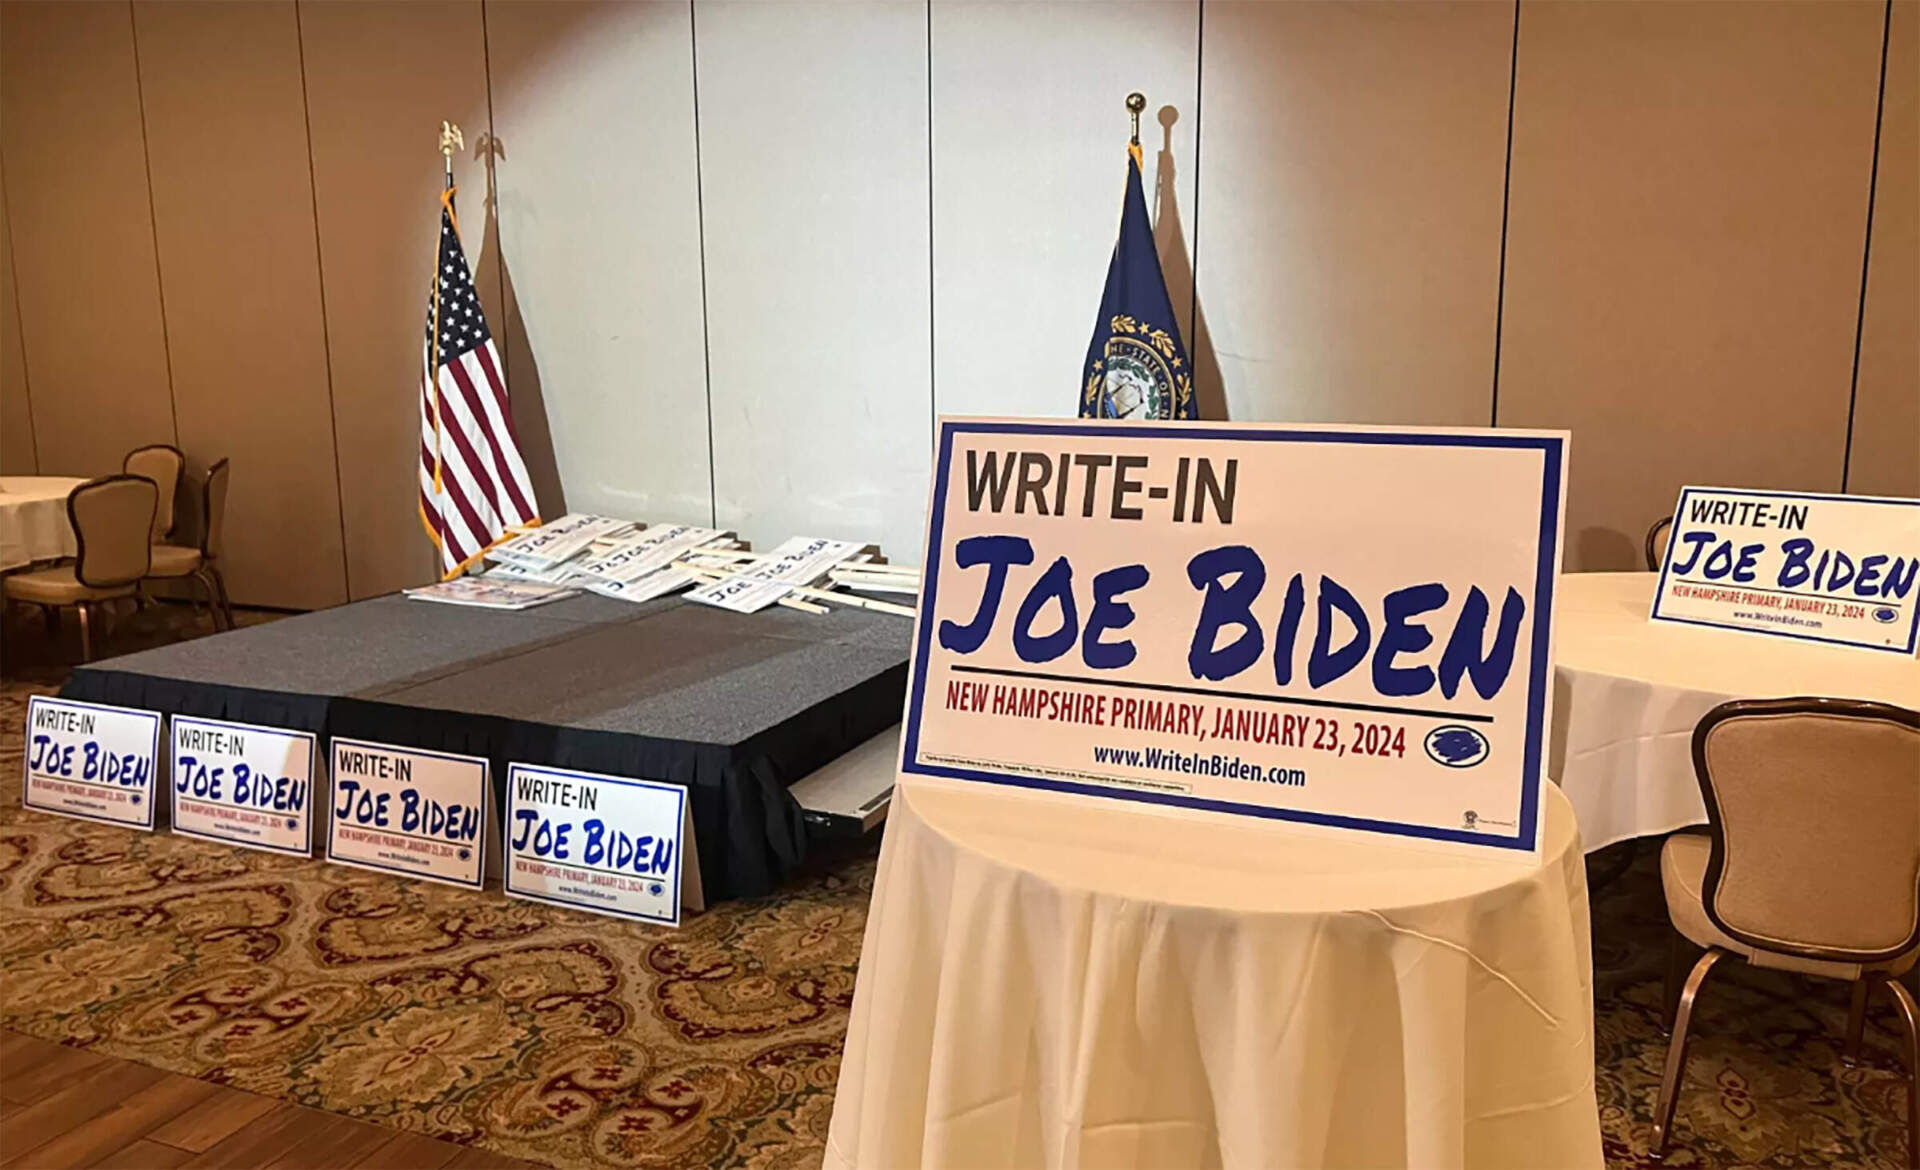 The headquarters of the write-in Joe Biden campaign at the Puritan Backroom in Manchester. (Rebecca Lavoie/NHPR)